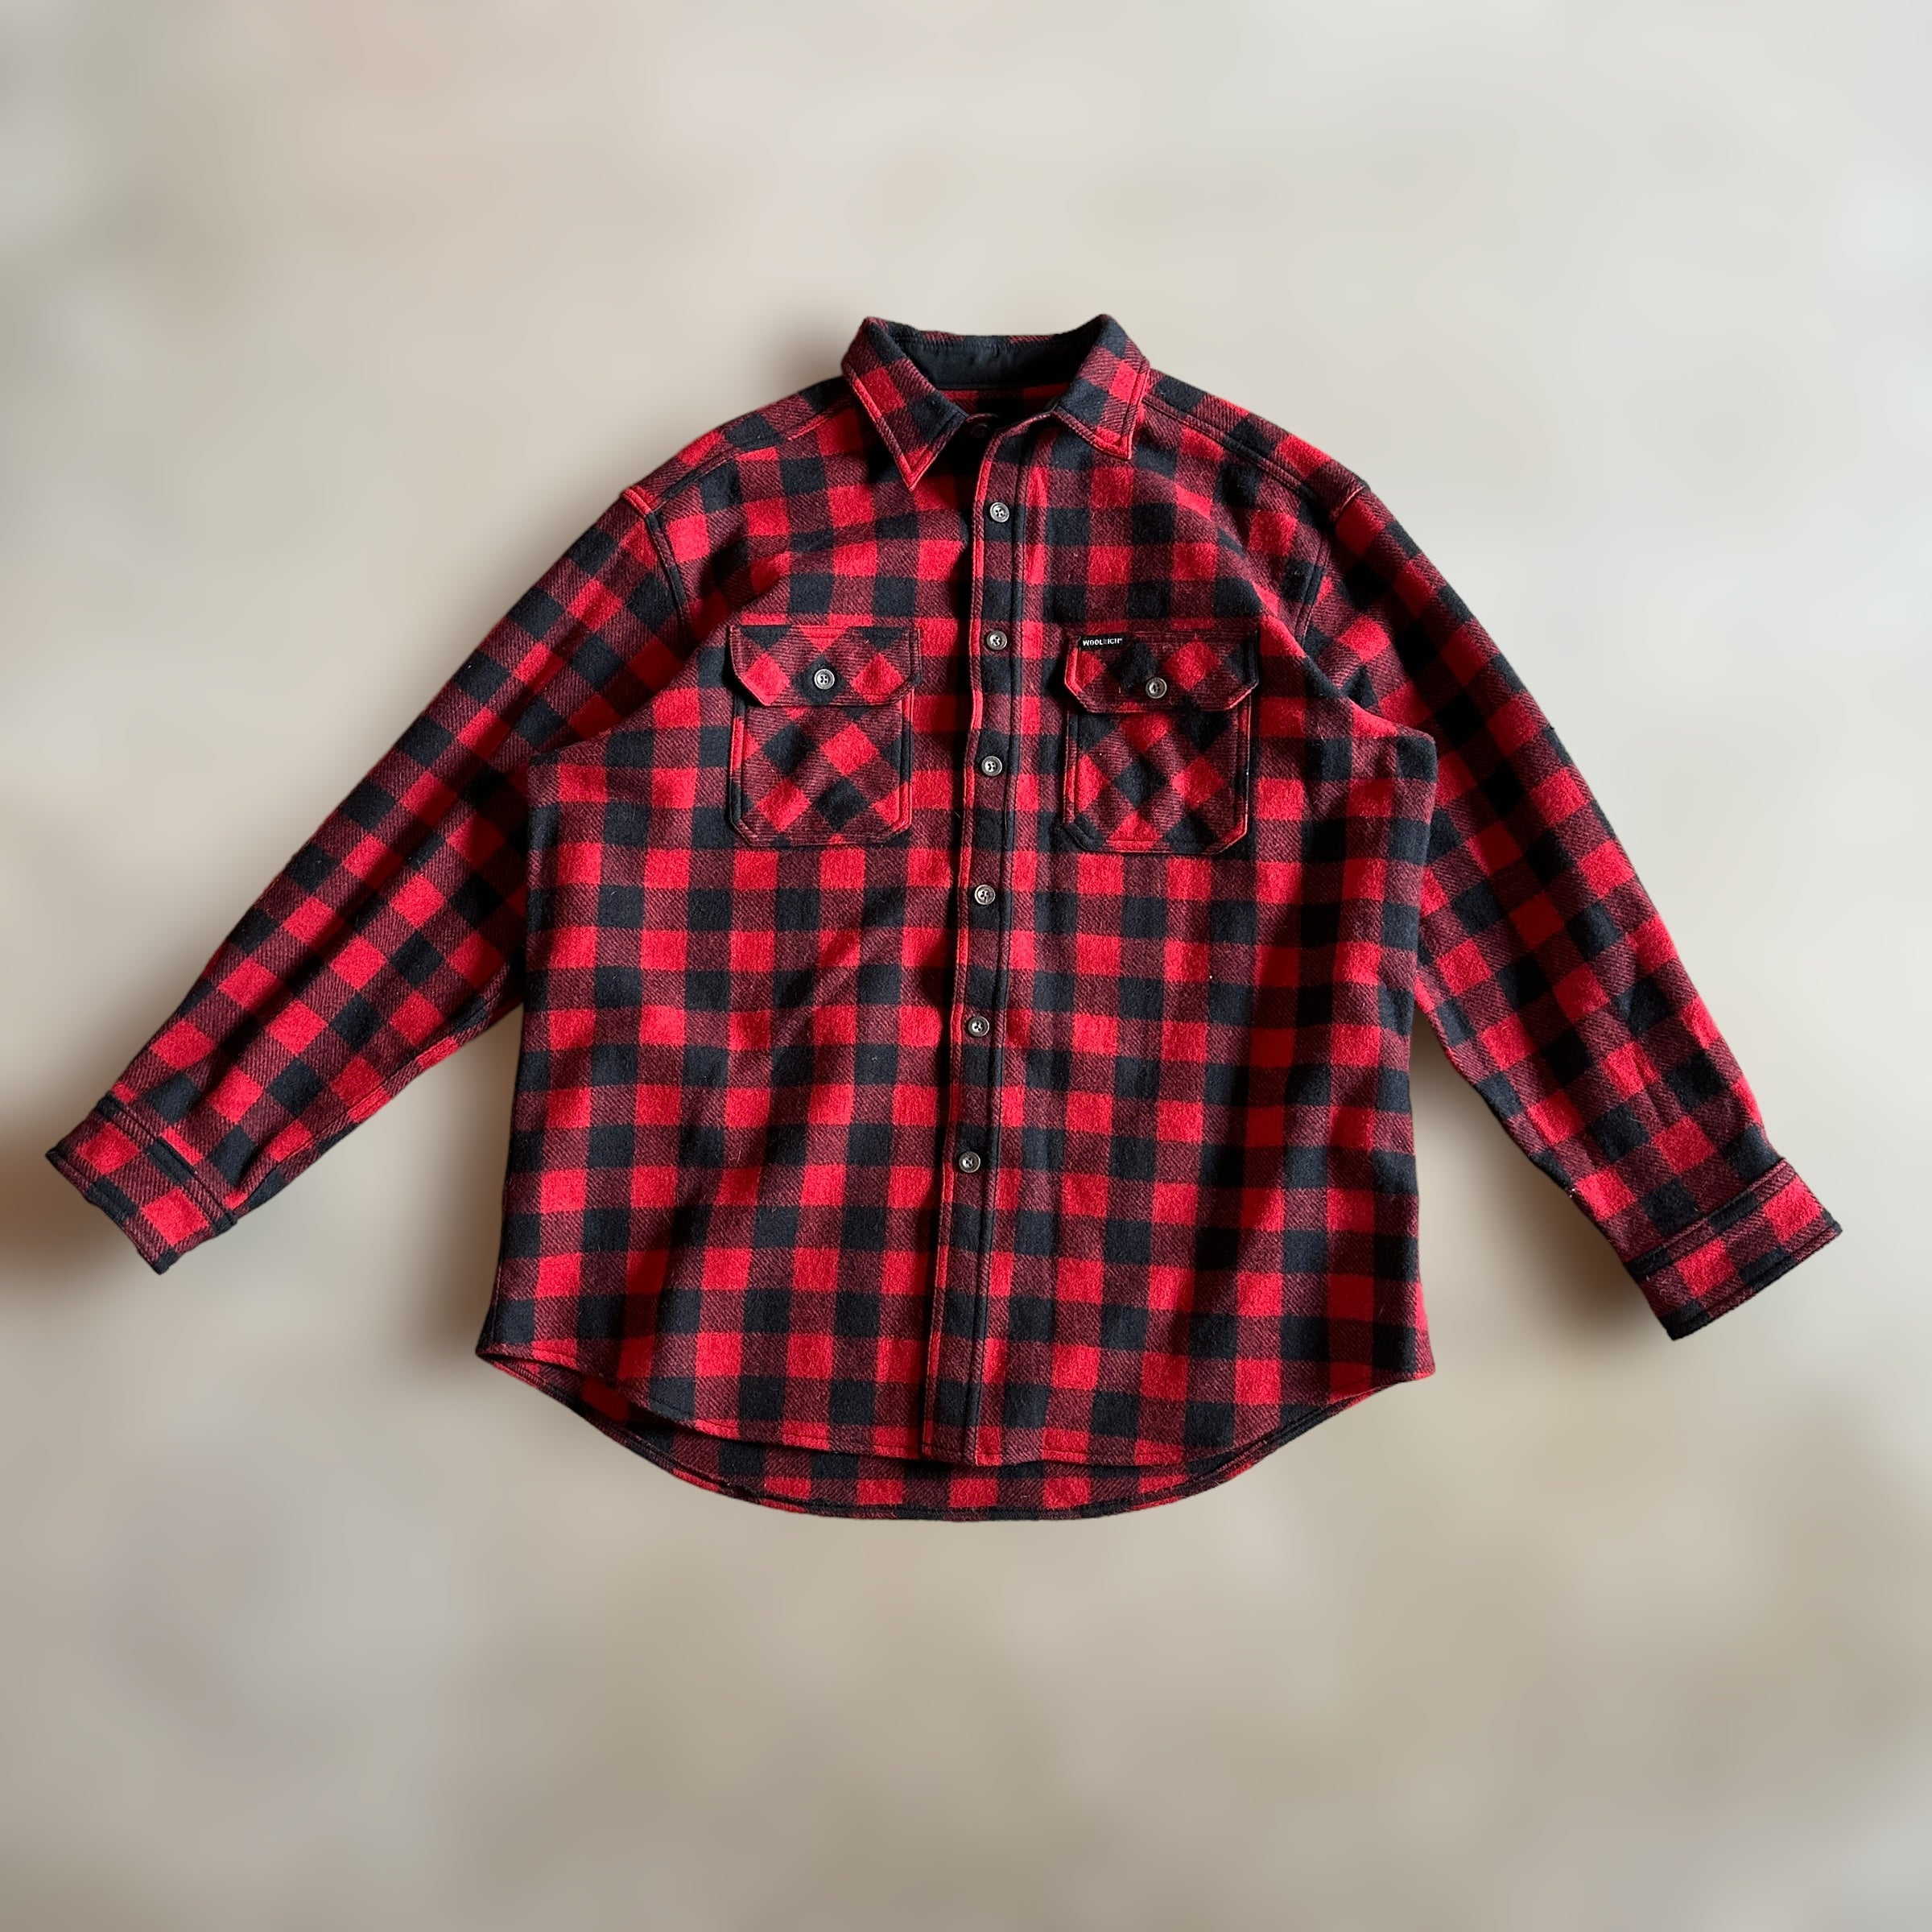 Woolrich buffalo plaid button down with double pockets